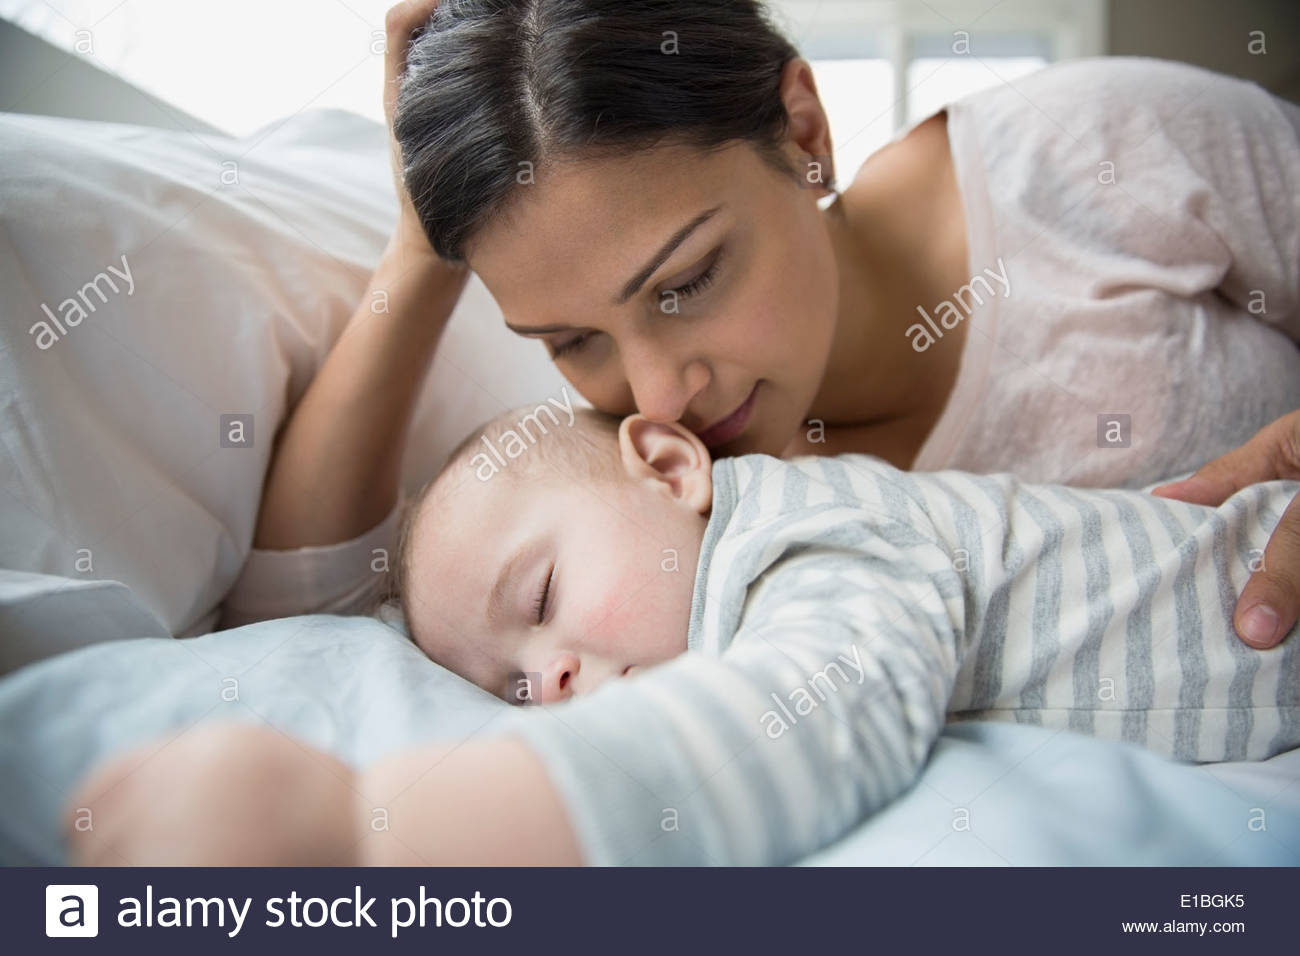 Mother watching sleeping baby on bed Stock Photo